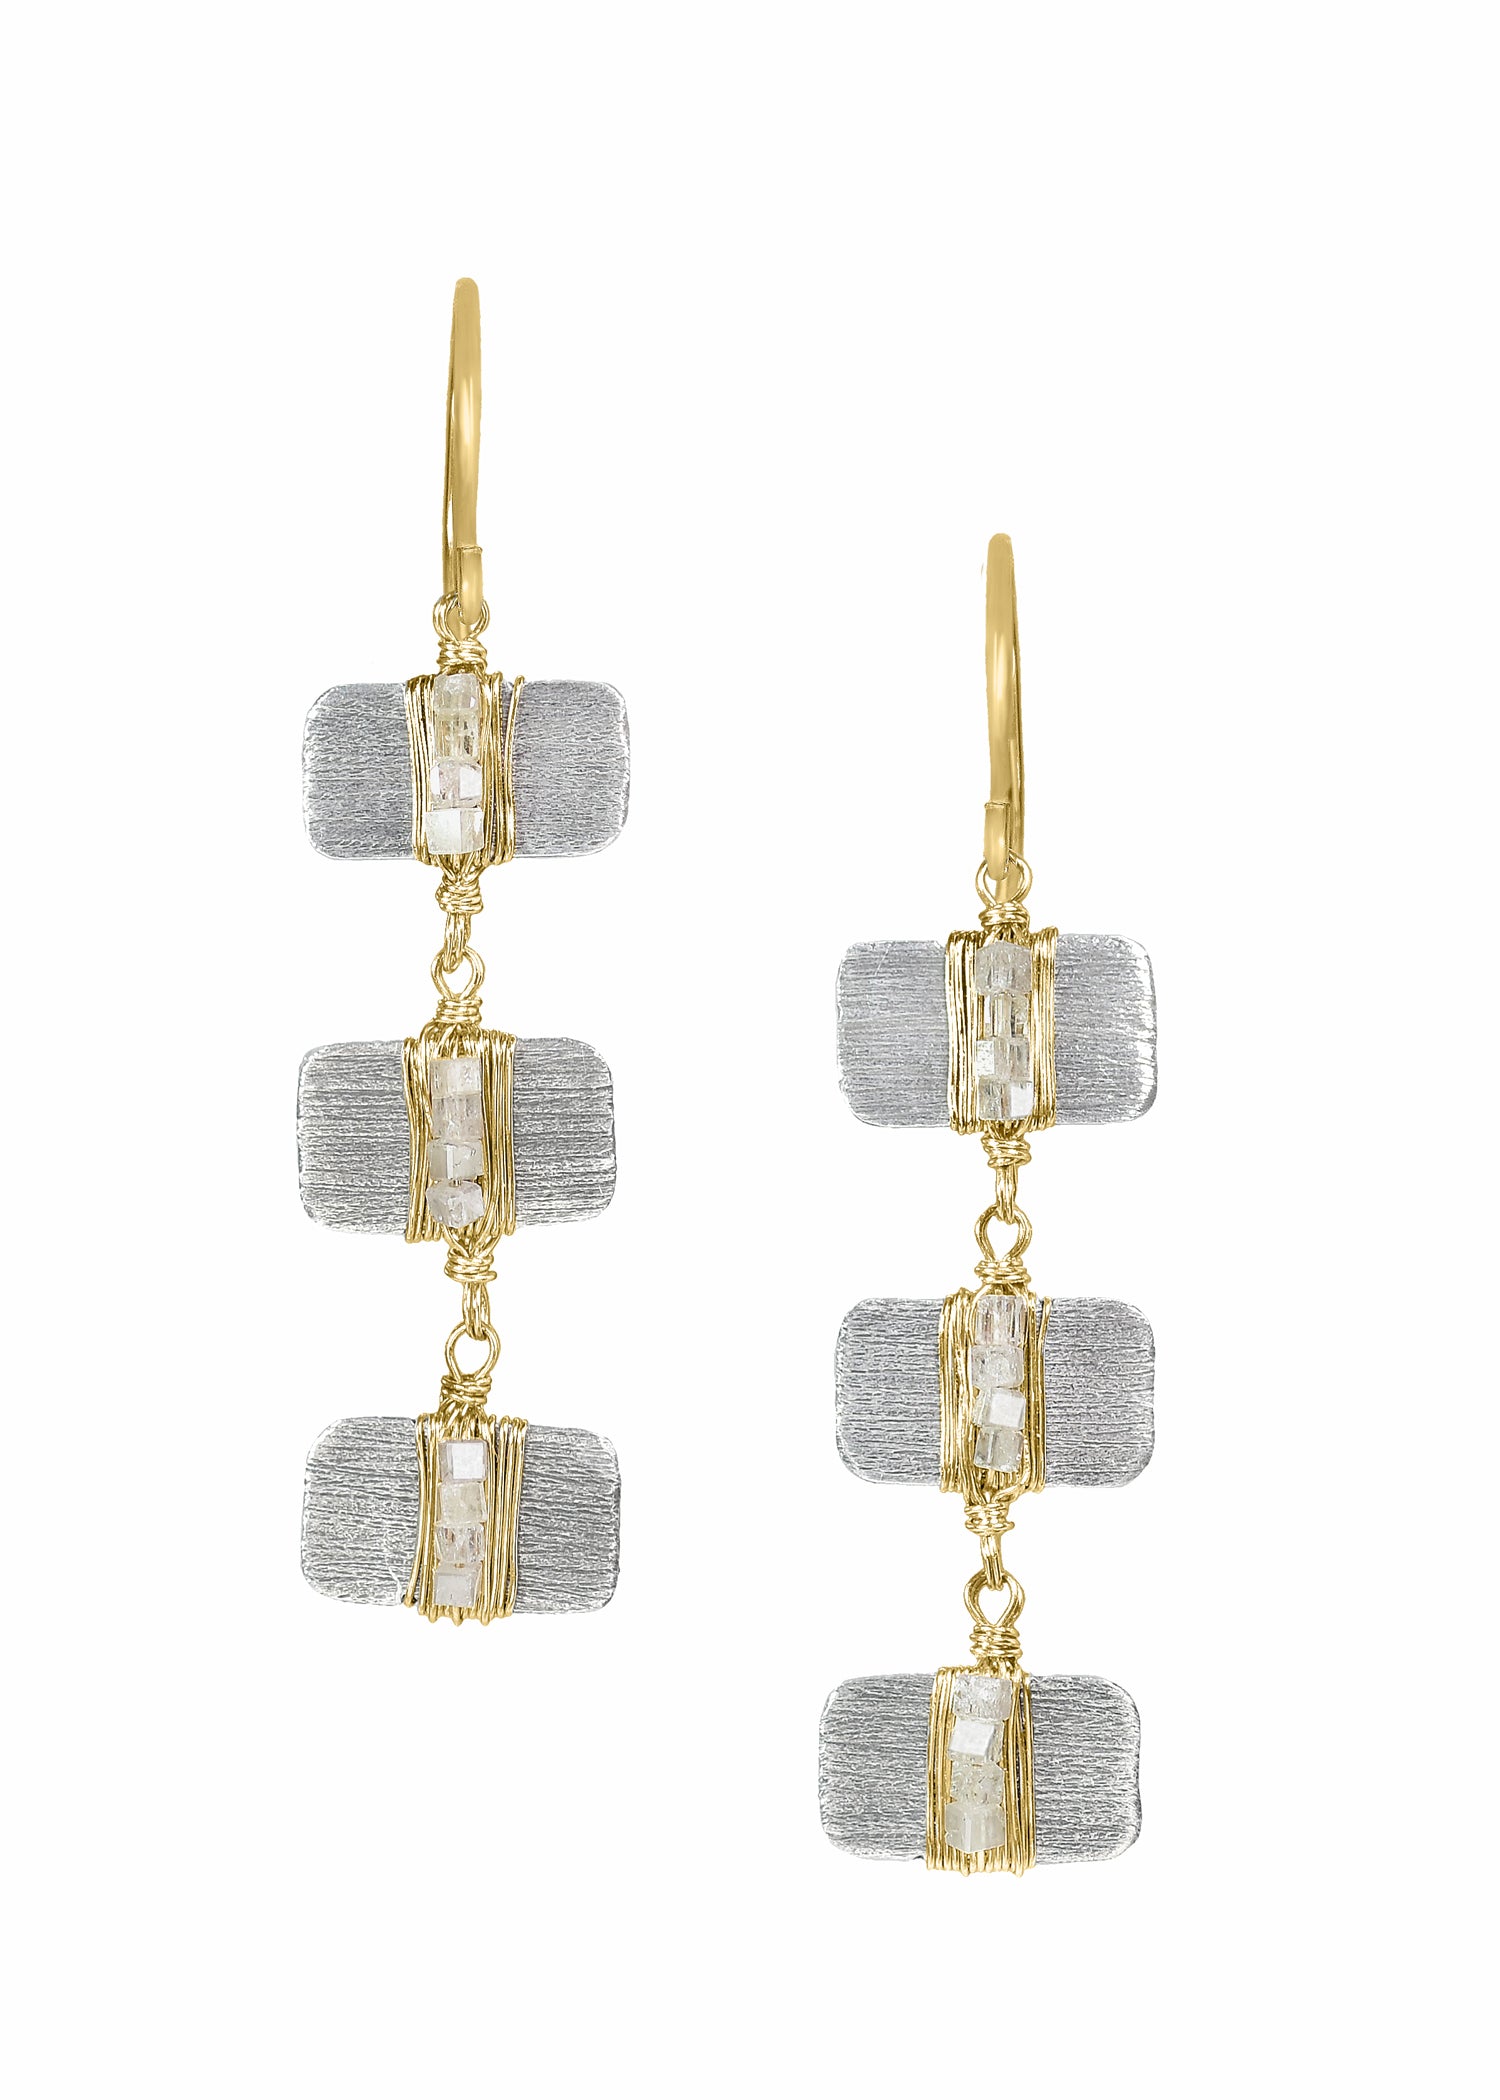 Diamond 14k gold Sterling silver Mixed metal Earrings measure 1-9/16" in length (including the ear wires) and 3/8" in width Handmade in our Los Angeles studio